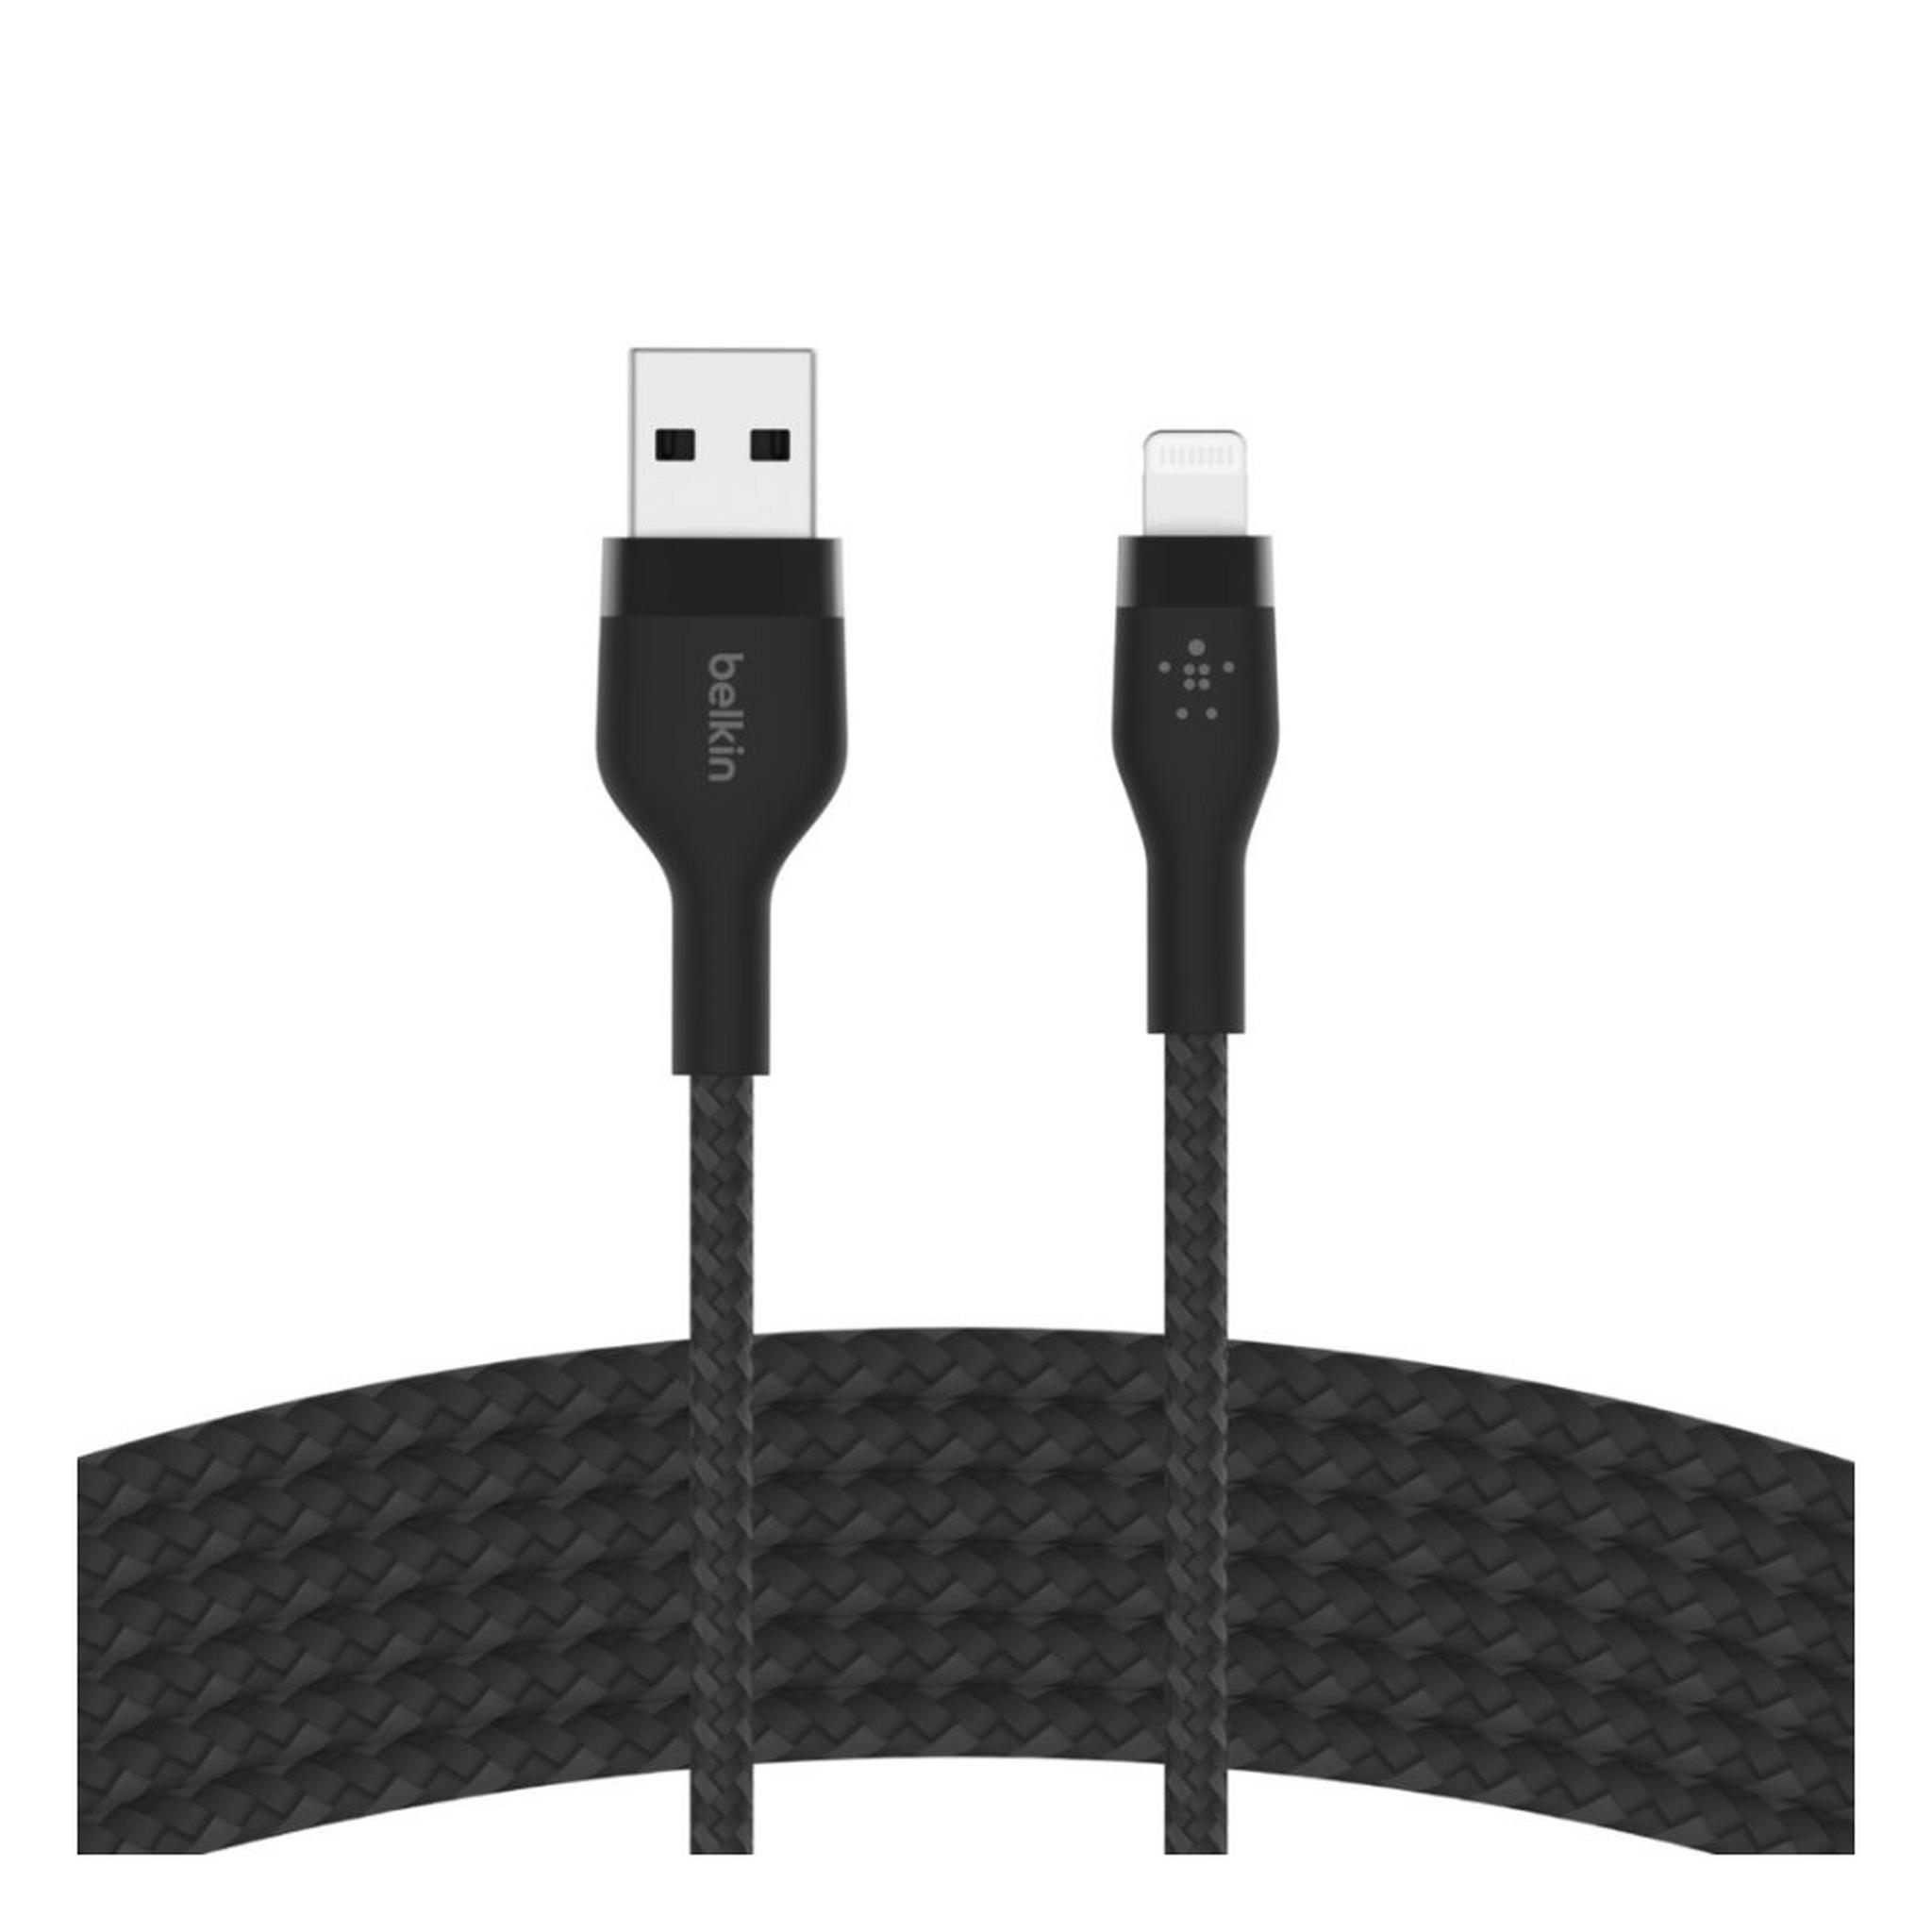 Belkin USB A to Lightning Cable 1M - Black